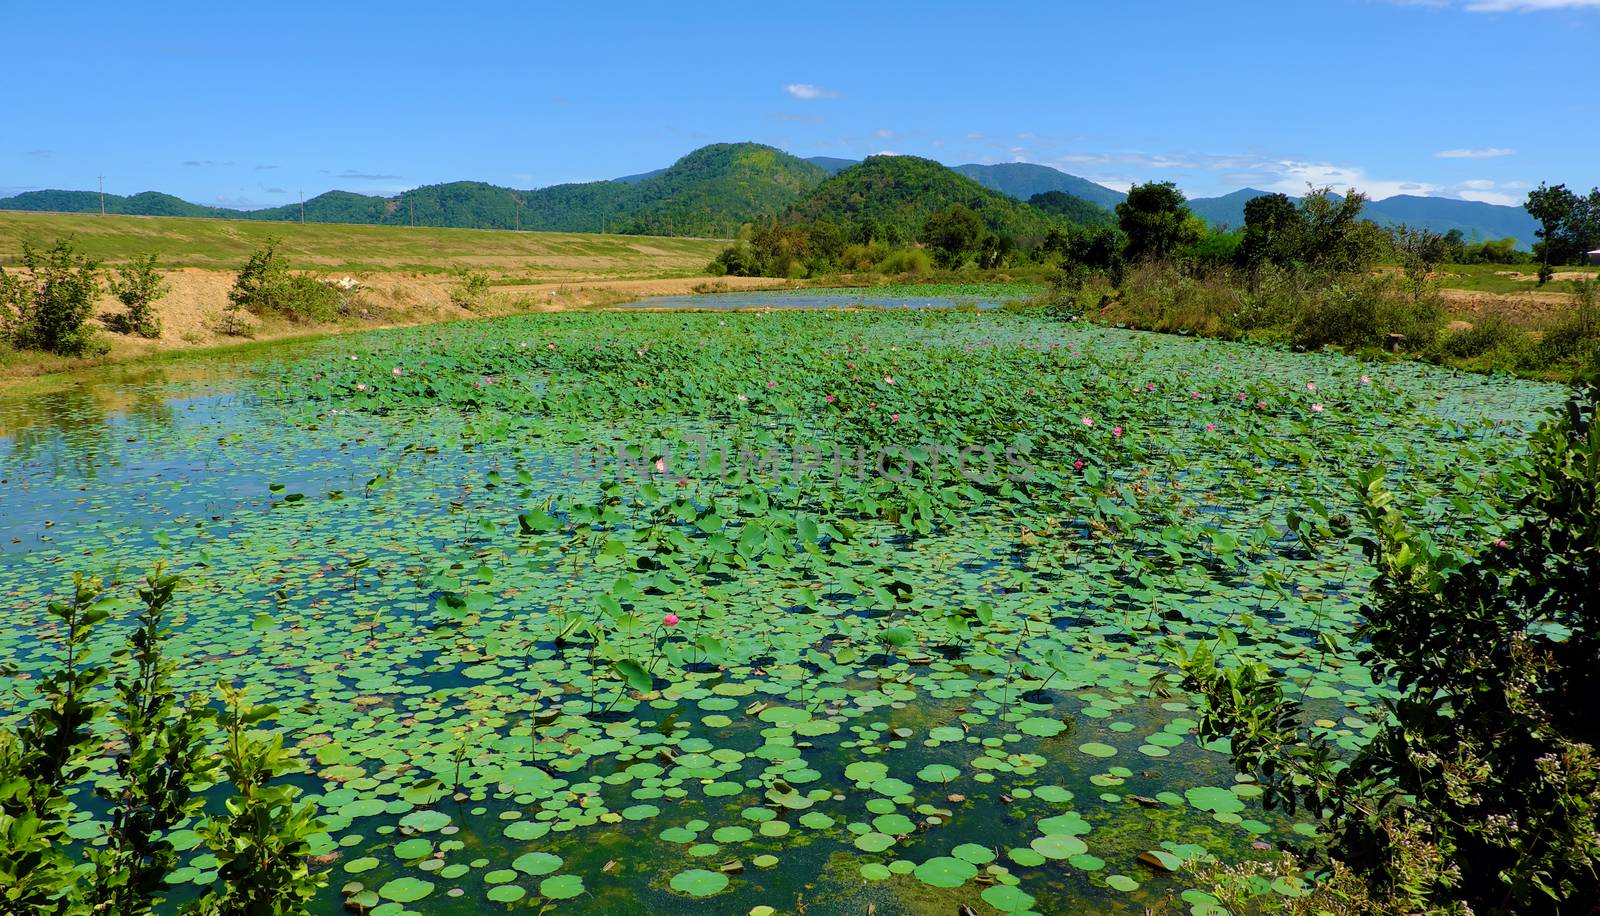 Wonderful landscape at Vietnamese countryside on summer day, wide lotus pond with green leaf under blue sky, mountain far away make nice scene for Vietnam travel 